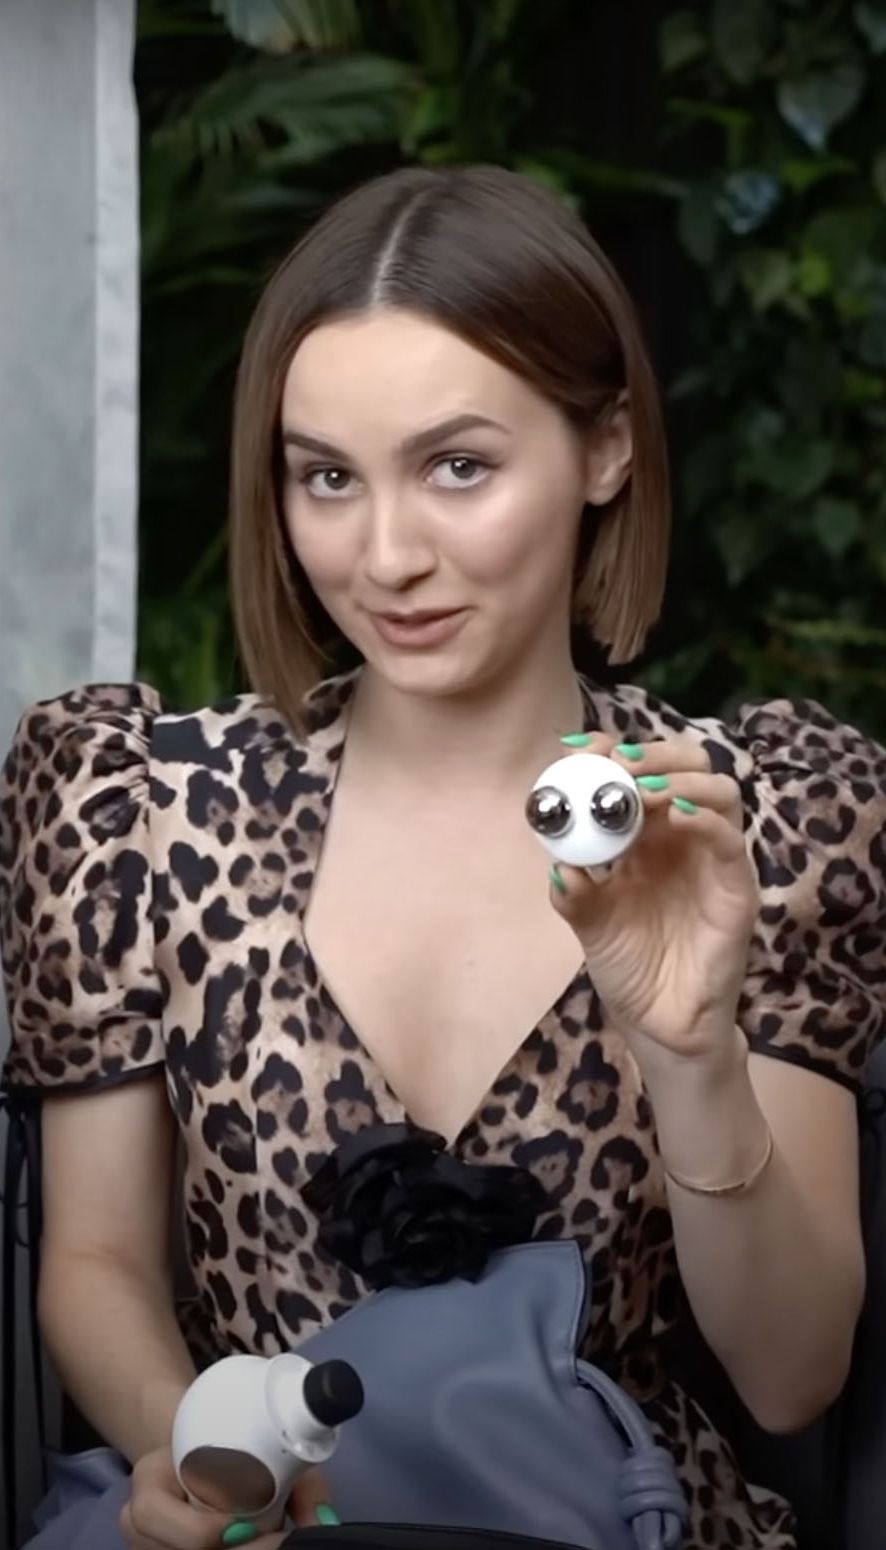 preview for Maude Apatow shows her Theraface Pro in her 'Inside my beauty bag' video